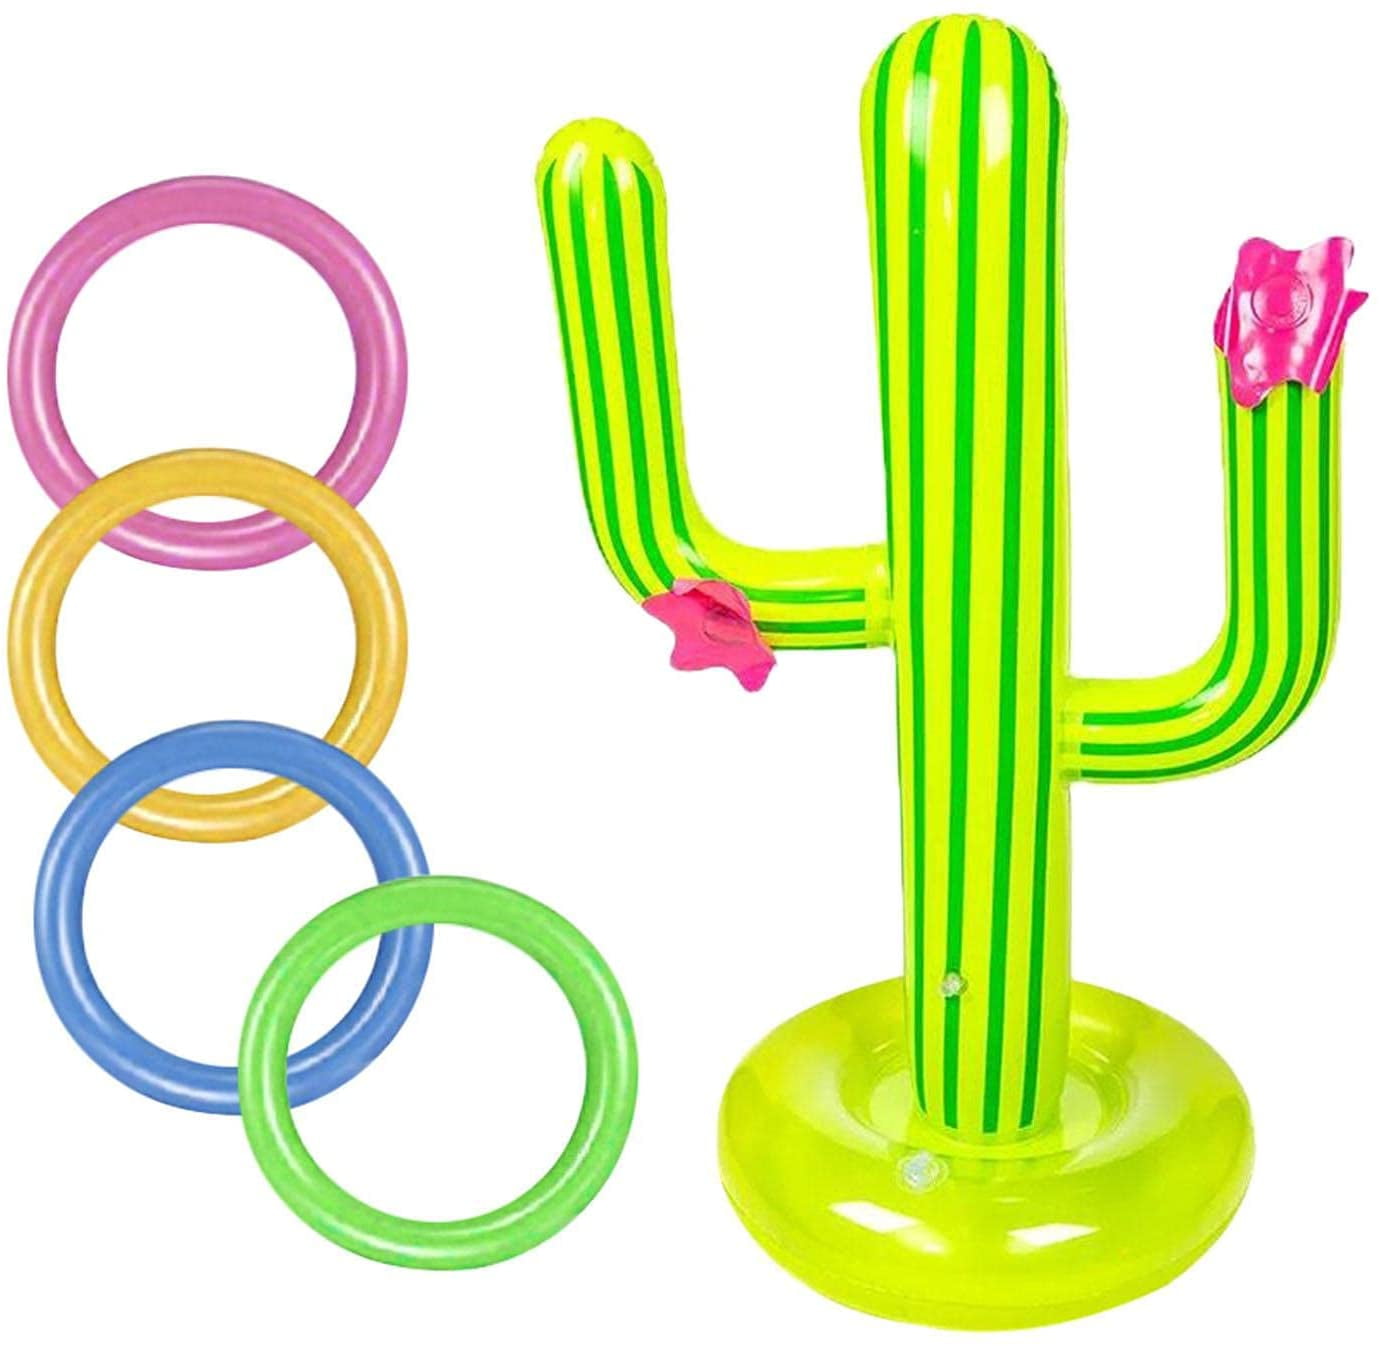 5x Inflatable Cactus Ring Toss Game Pool Summer Toys Party In/Outdoor Supplies 